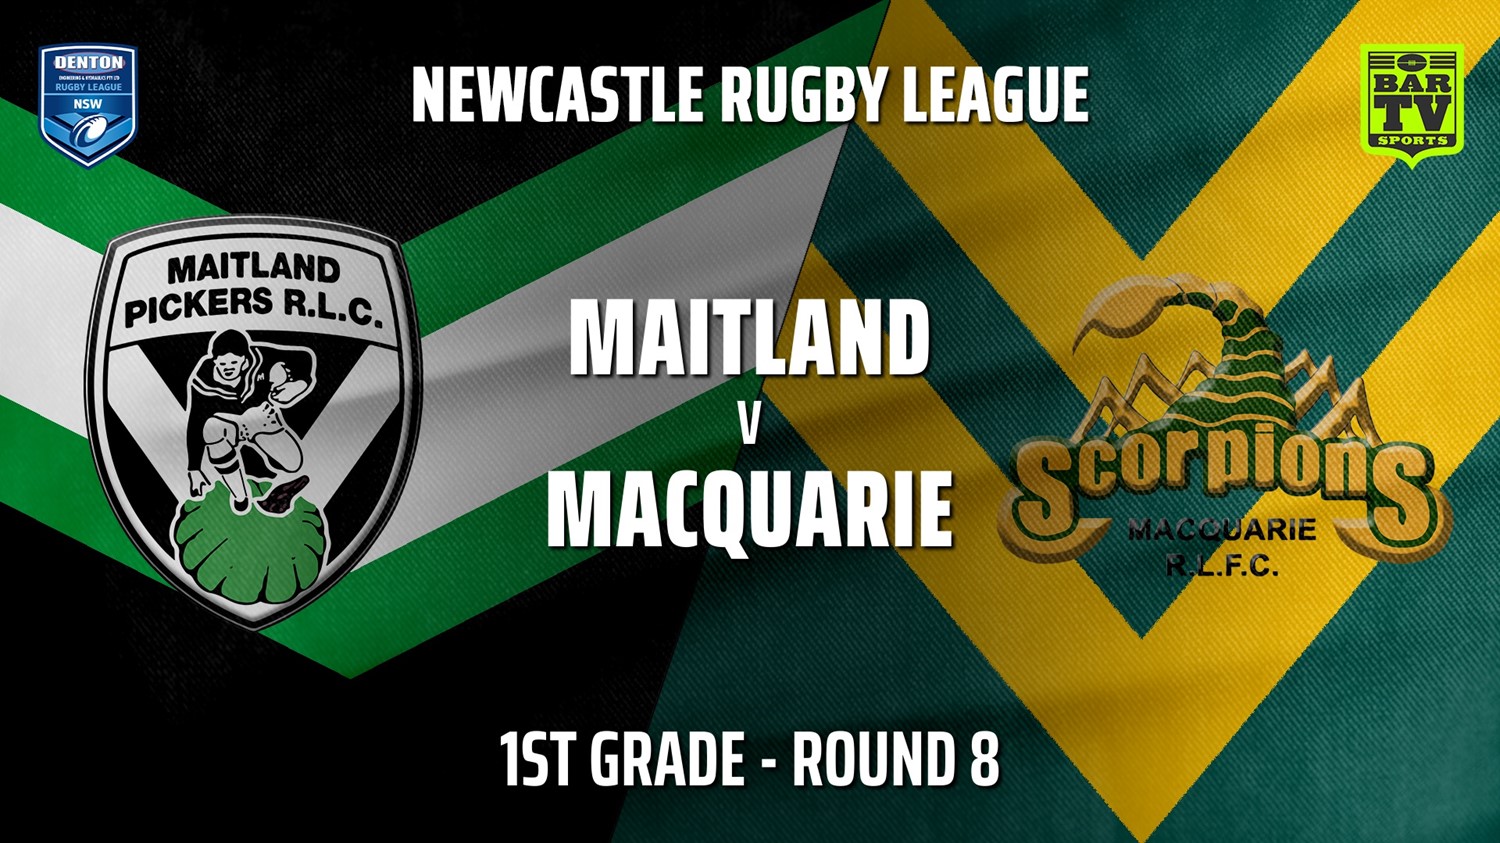 210522-Newcastle Rugby League Round 8 - 1st Grade - Maitland Pickers v Macquarie Scorpions Slate Image